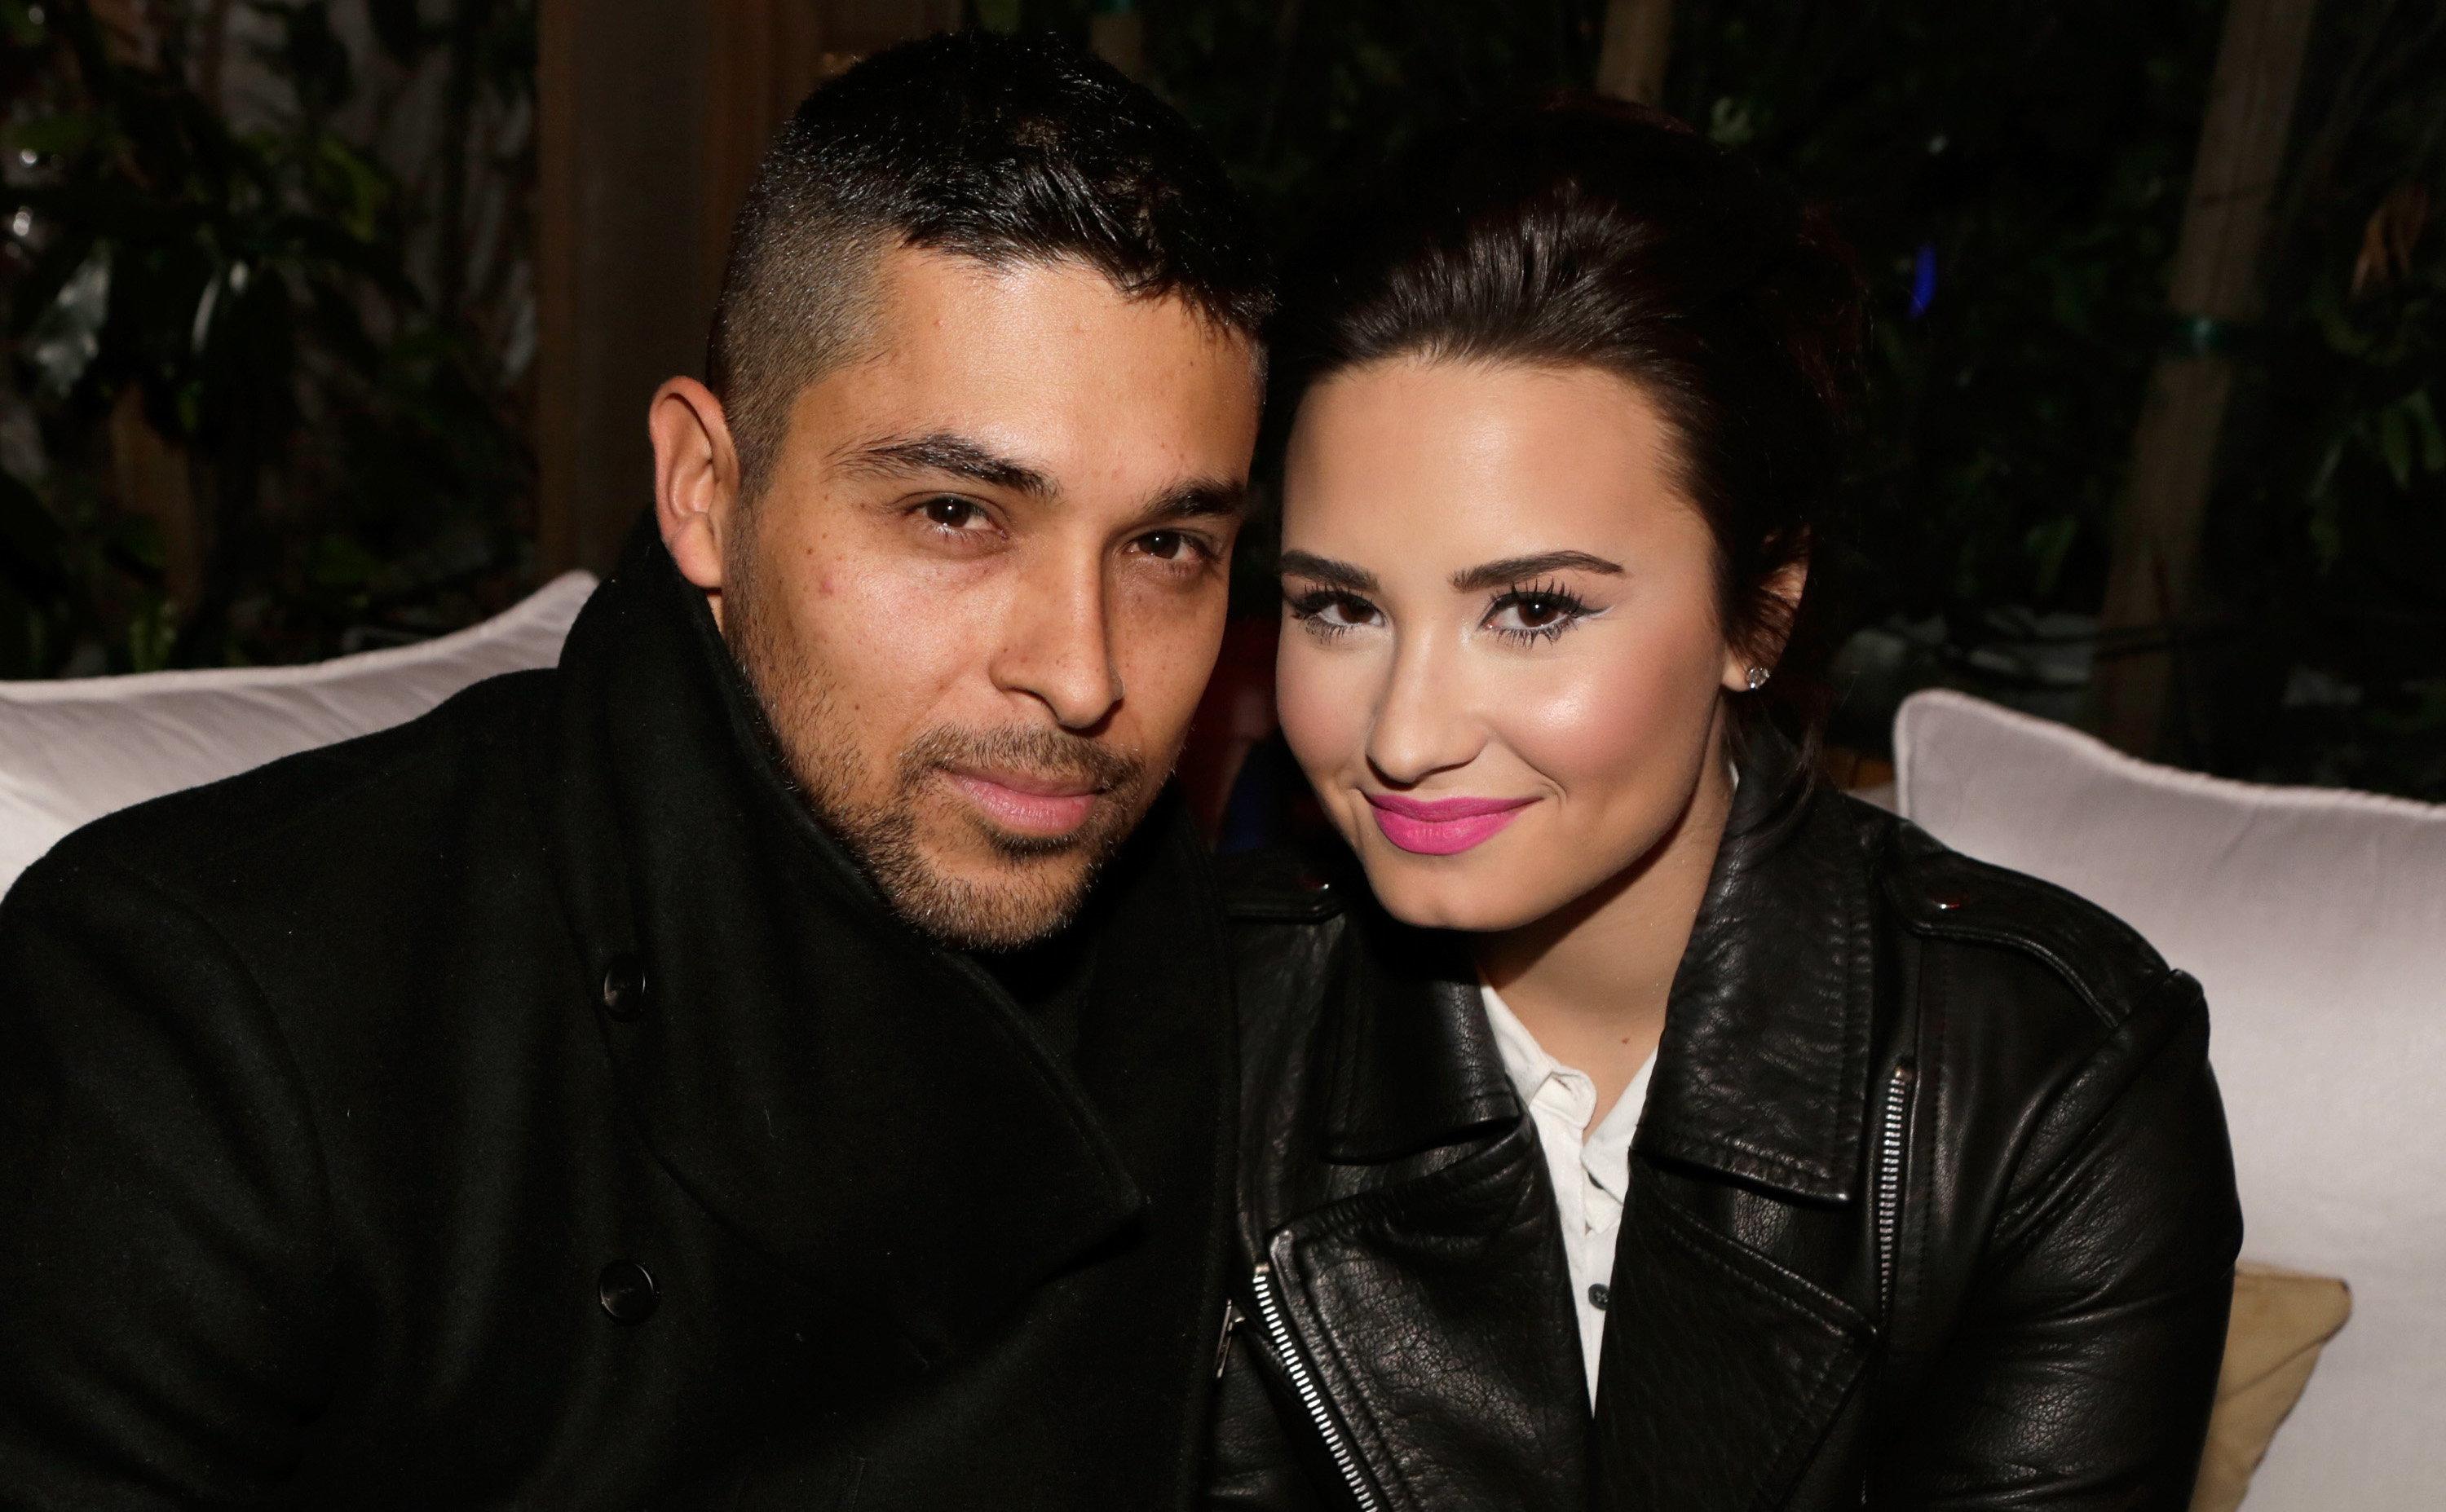 Demi Lovato and Wilmer Valderrama's Instagram Reunion Has Fans Excited